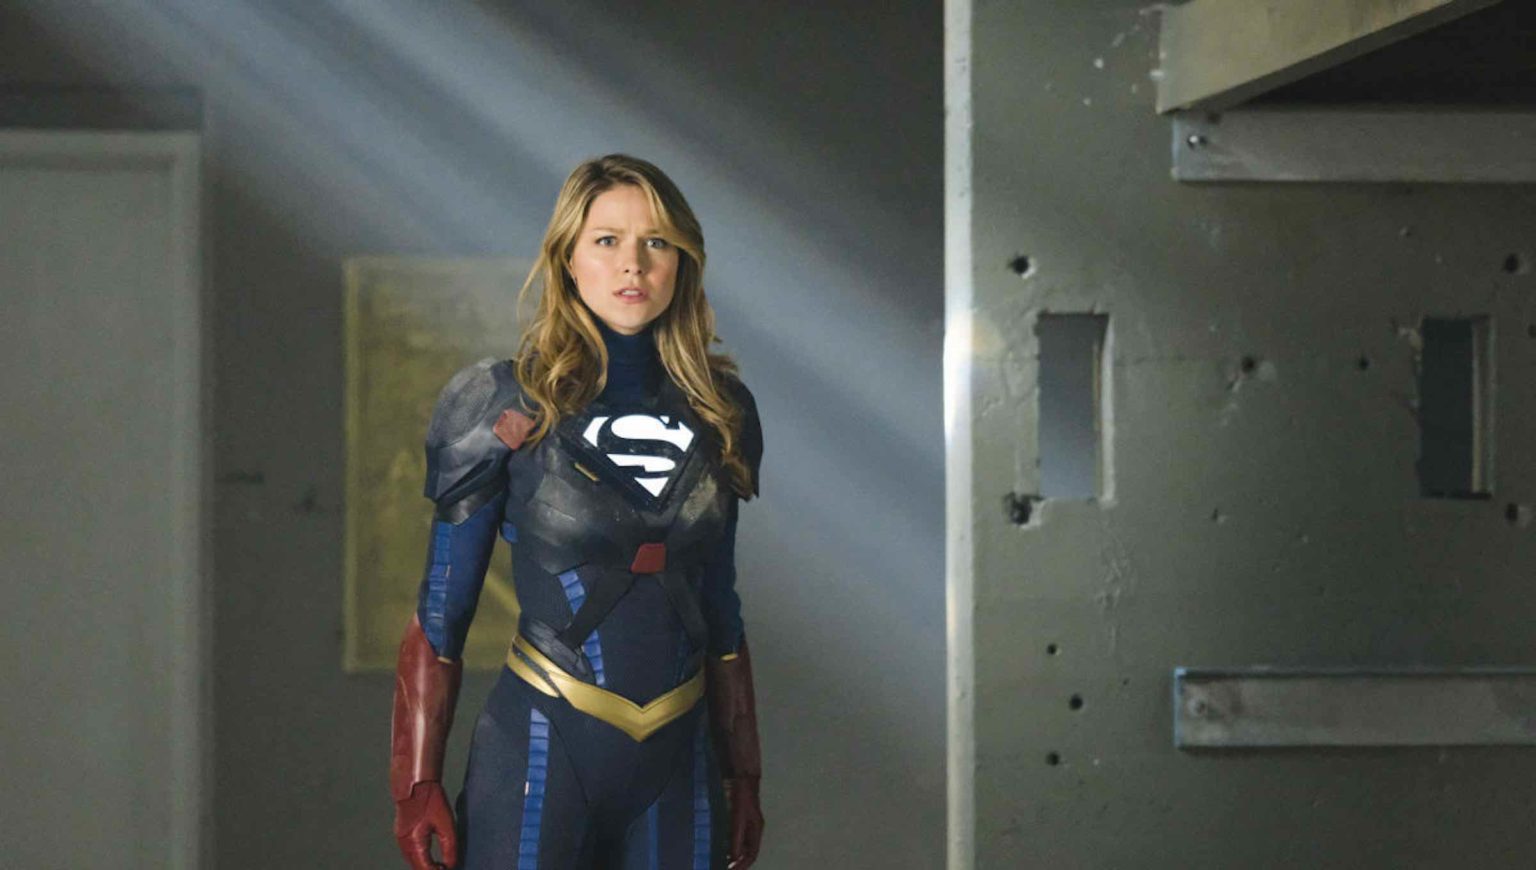 Here’s why we think that 'Supergirl' should go the route of 'Crazy Ex-Girlfriend' and have Kara remain single in season 5.